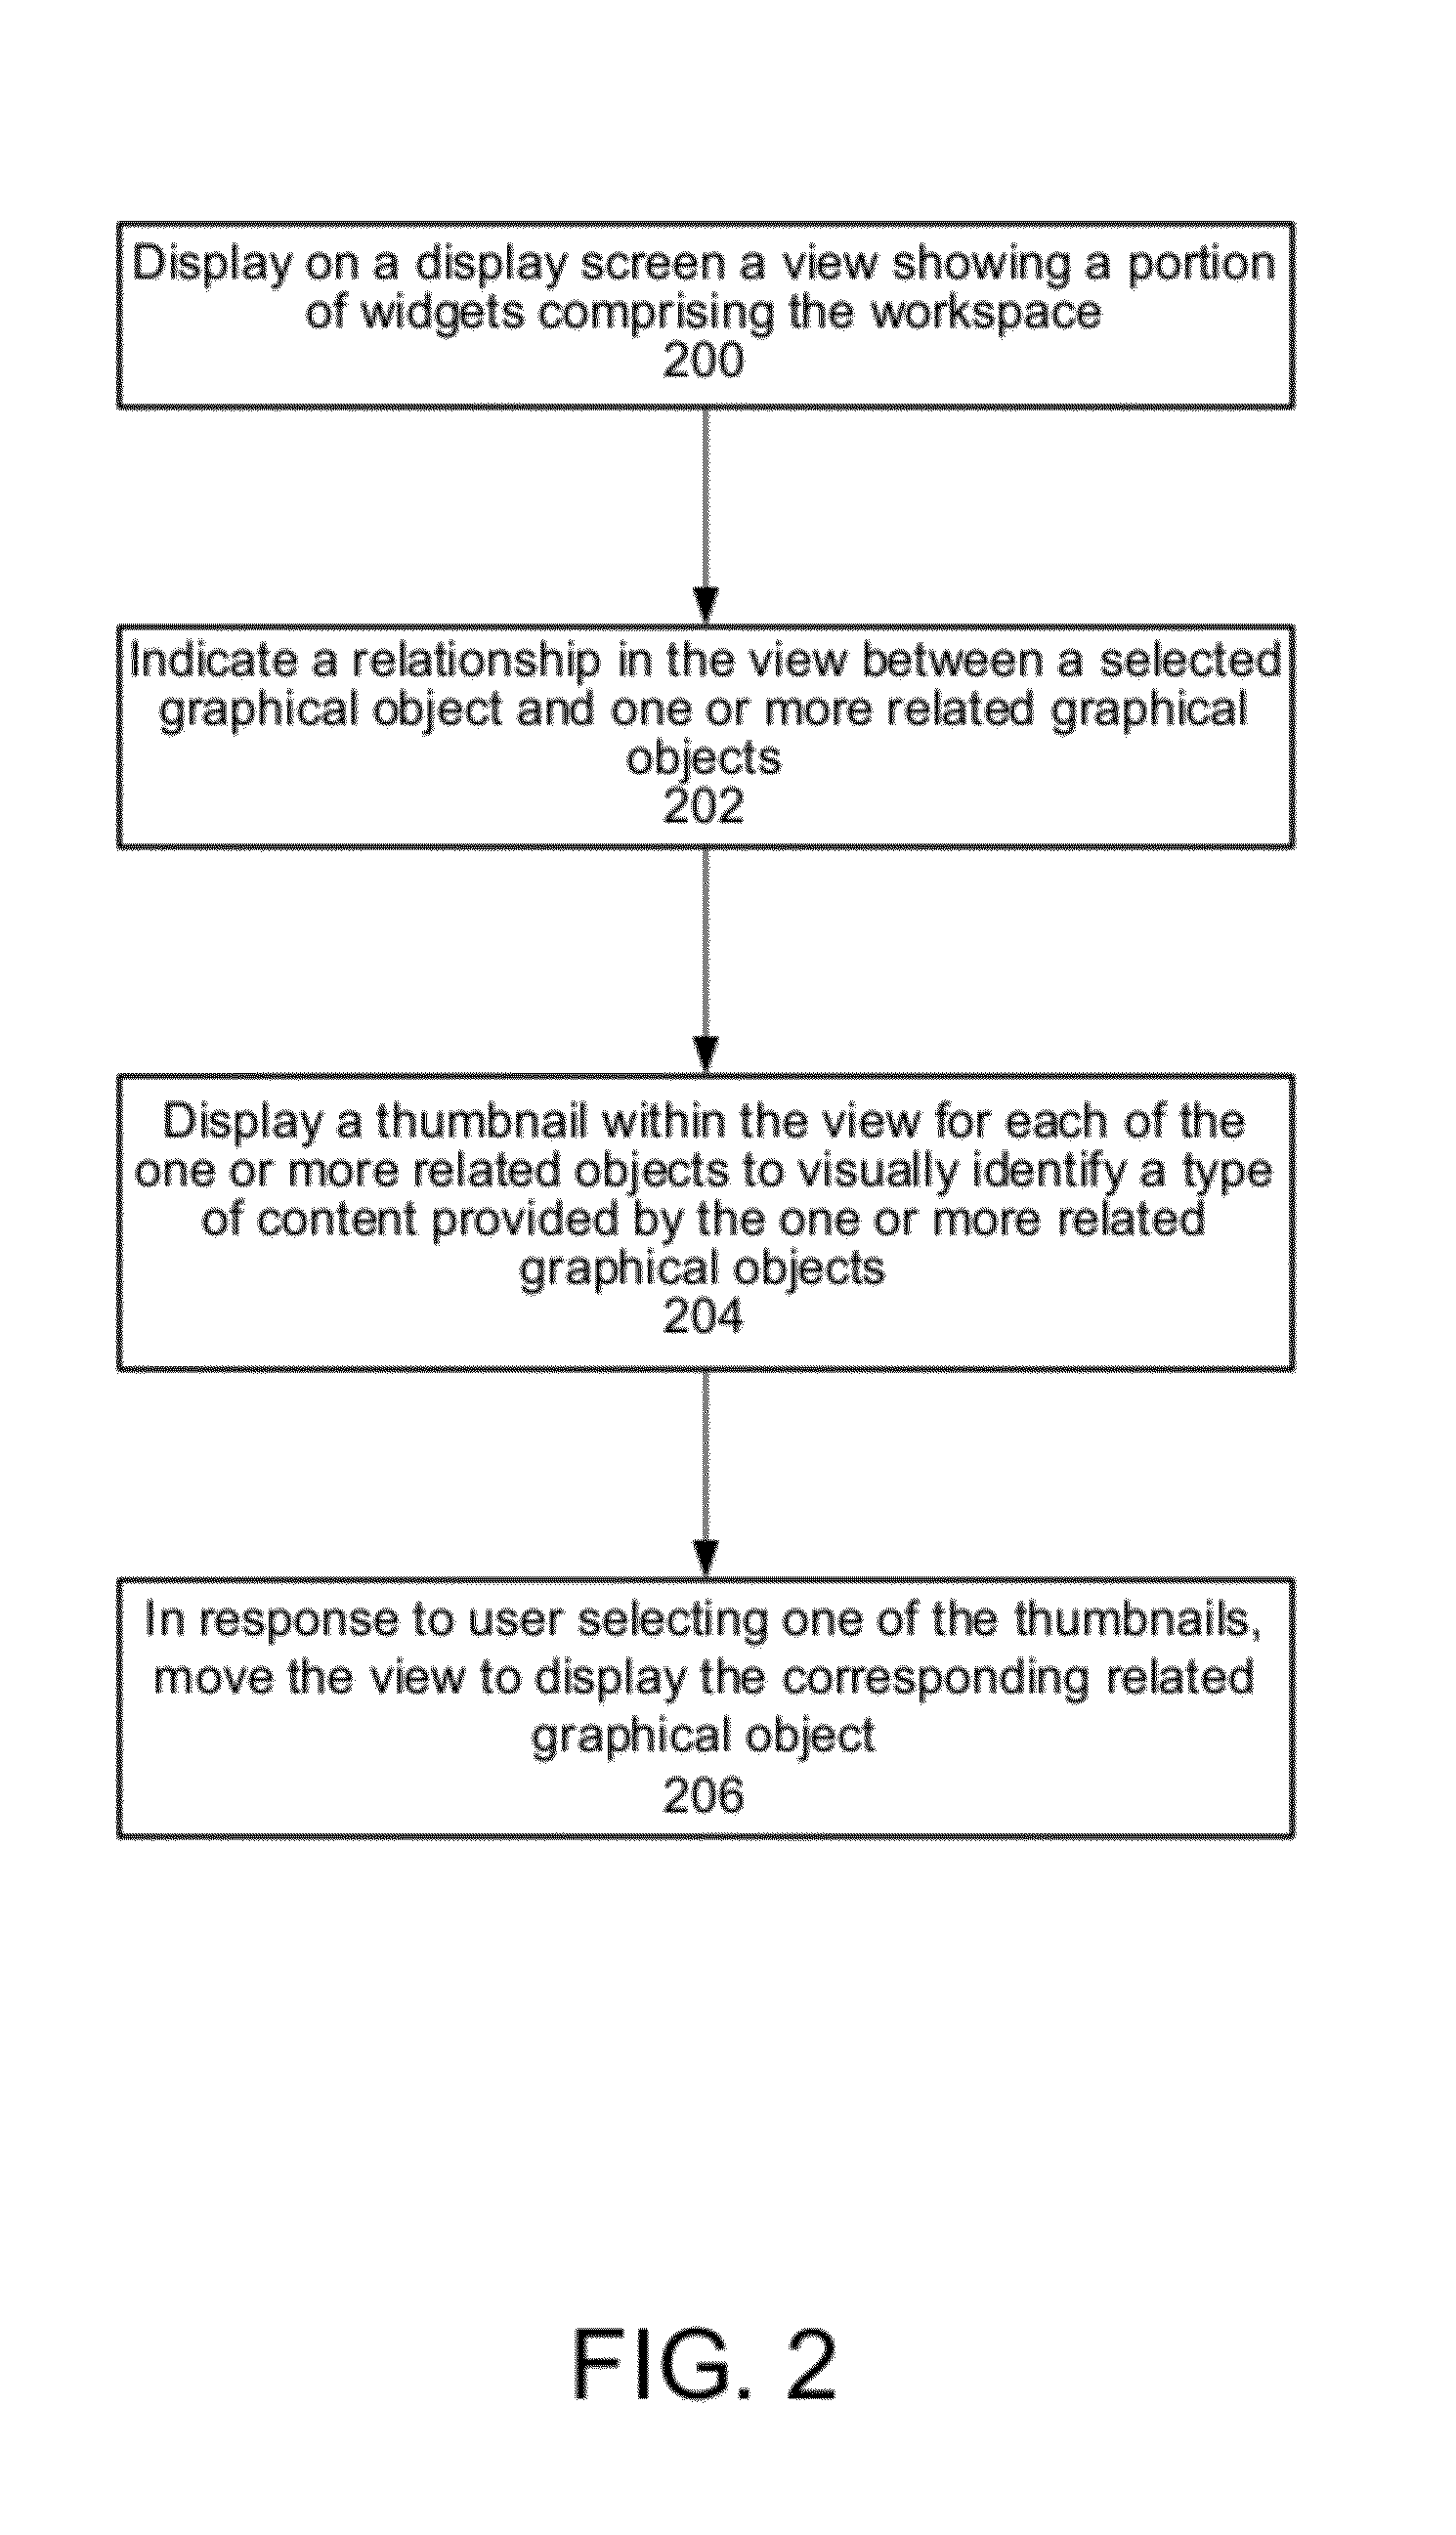 Displaying graphical object relationships in a workspace